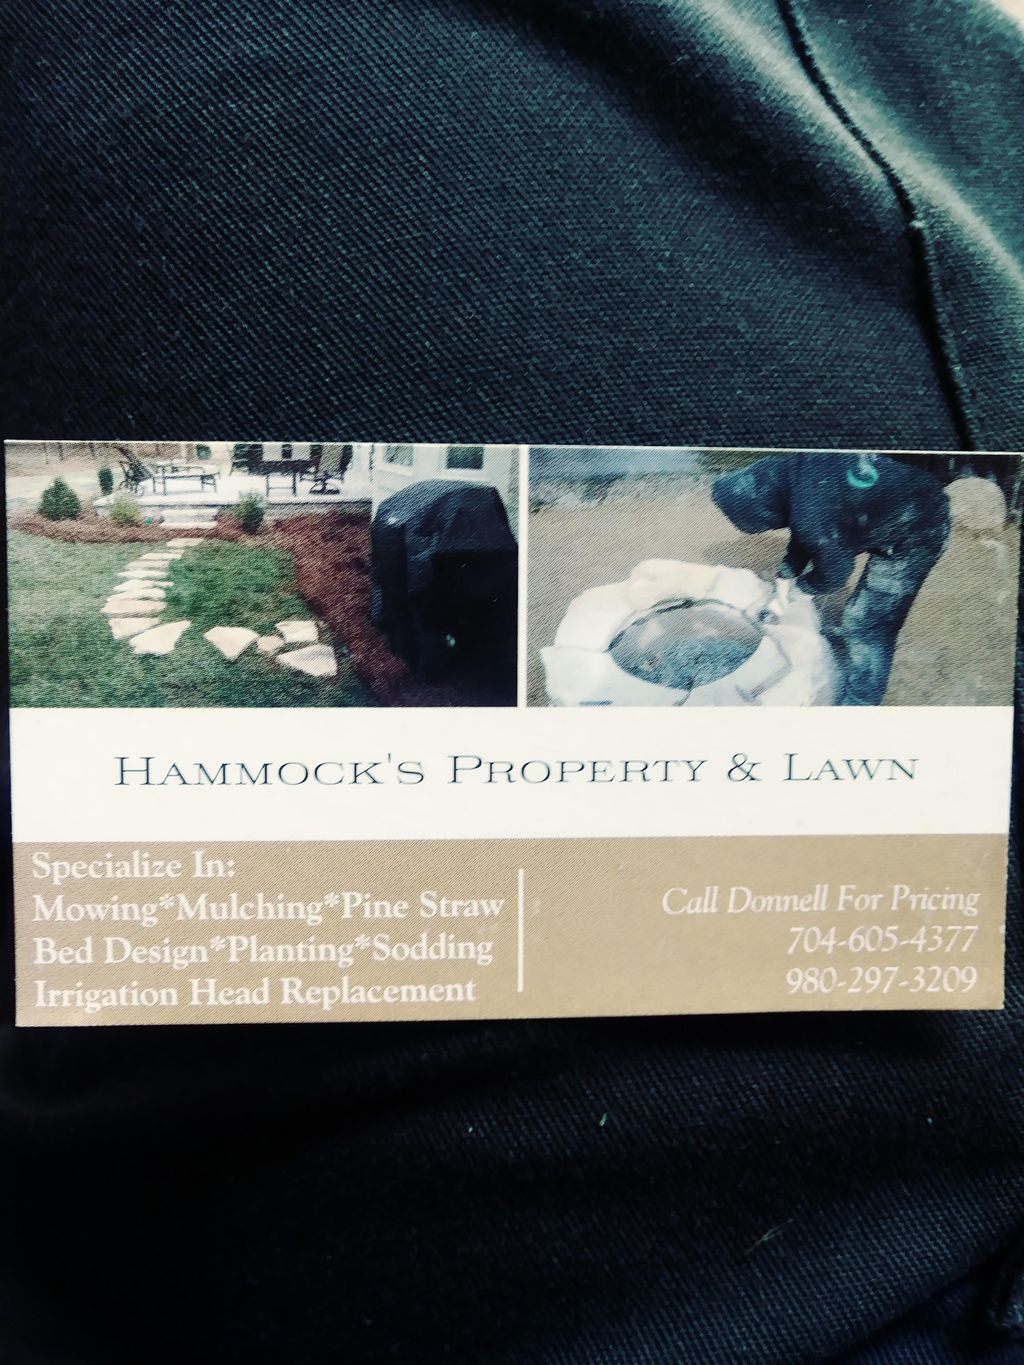 Hammock's Property and Lawn Services